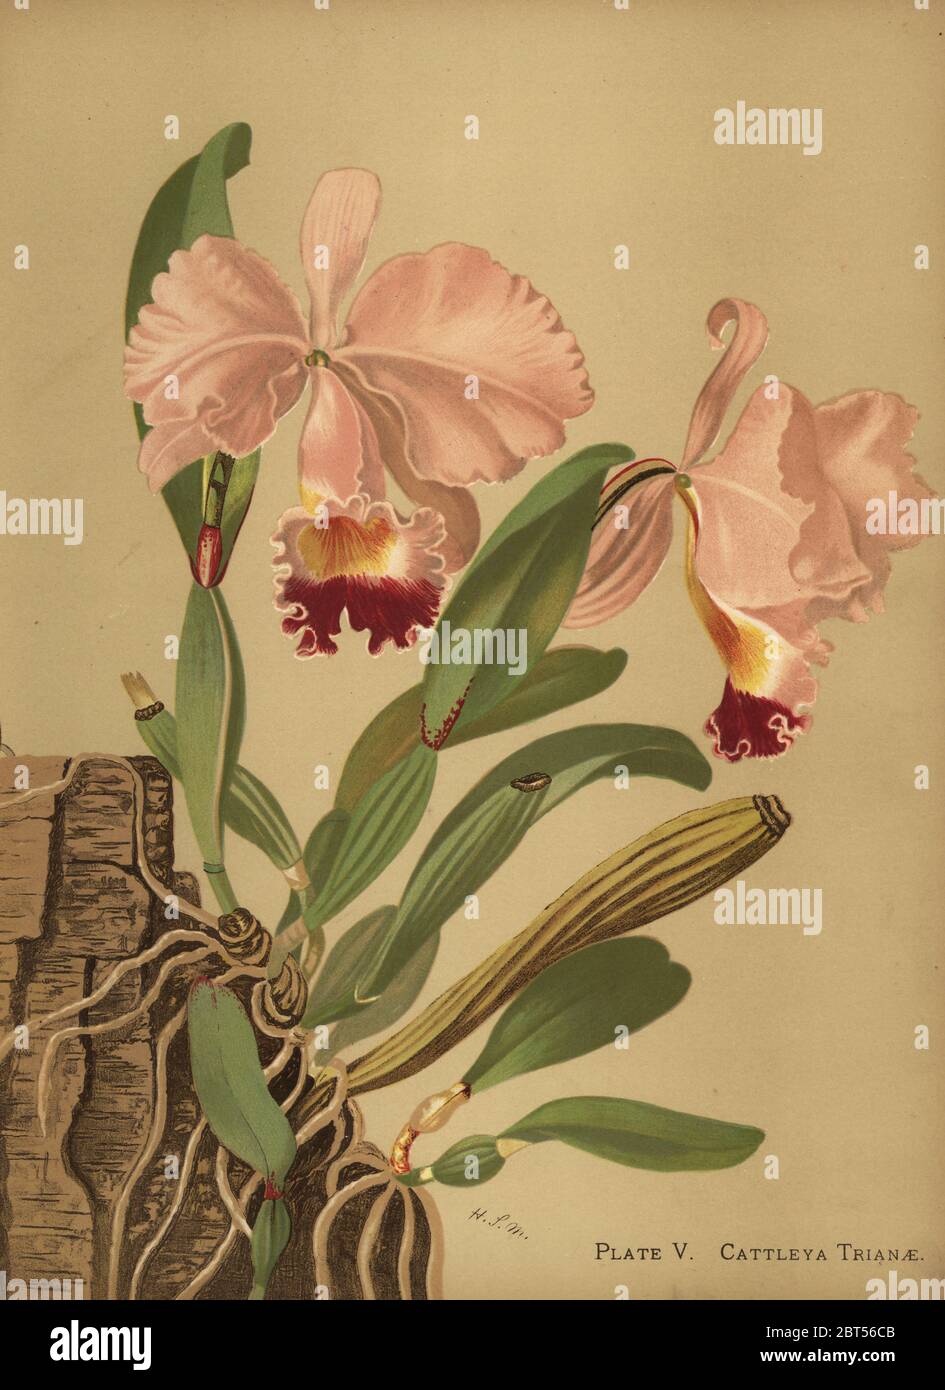 Flor de Mayo or Christmas orchid, Cattleya trianae. Chromolithograph by Hatch Company after a botanical illustration by Harriet Stewart Miner from Orchids, the Royal Family of Plants, Lee & Shepard, Boston, 1885. The first American color plate book on orchids by woman botanist Miner. Stock Photo